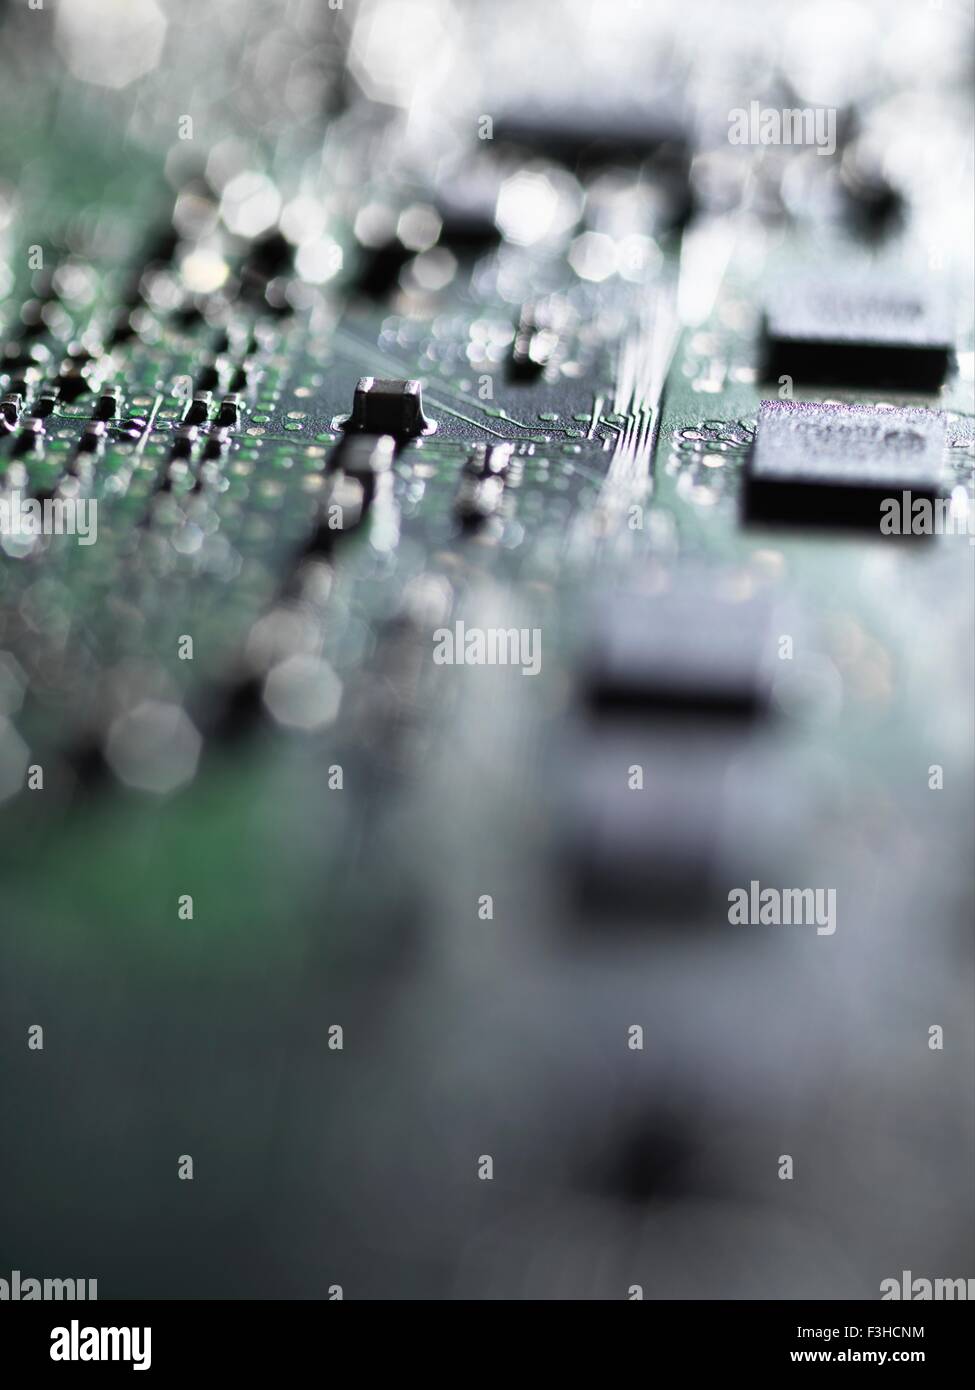 Close up of mother board of laptop Stock Photo